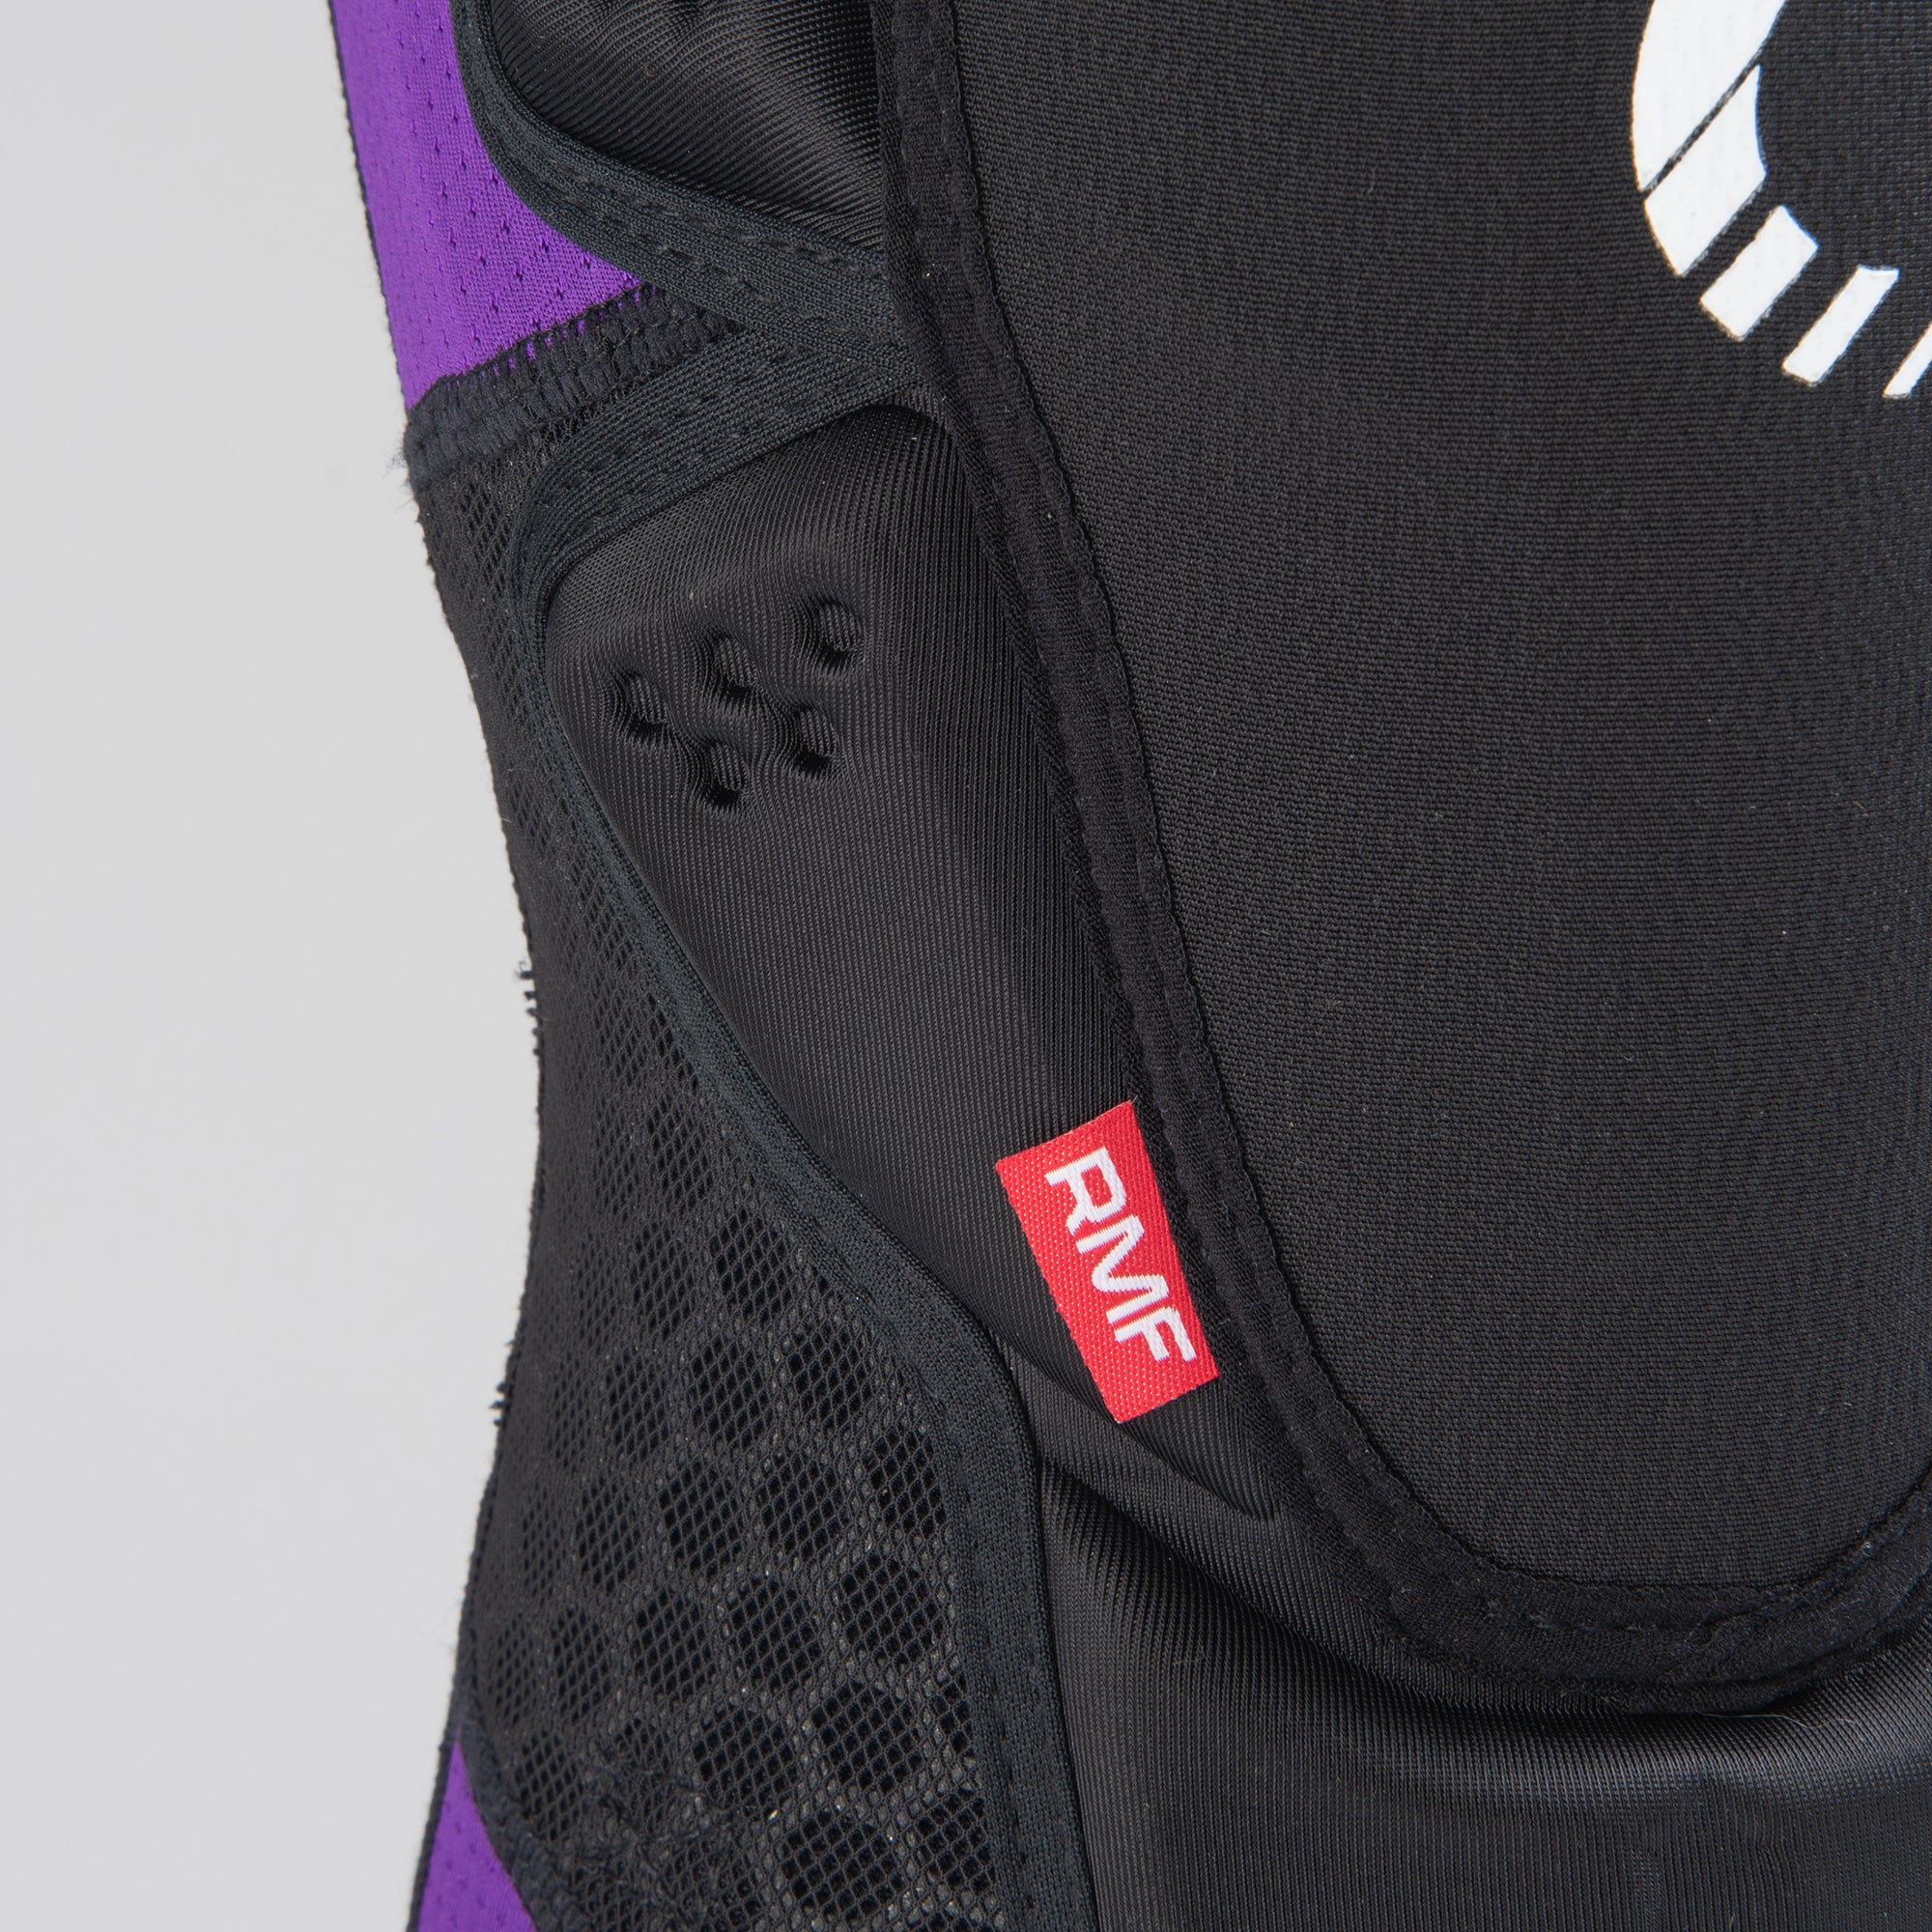 EVS Sports Collaborates with Axell Hodges for Slayco96 Knee Guard - Racer X